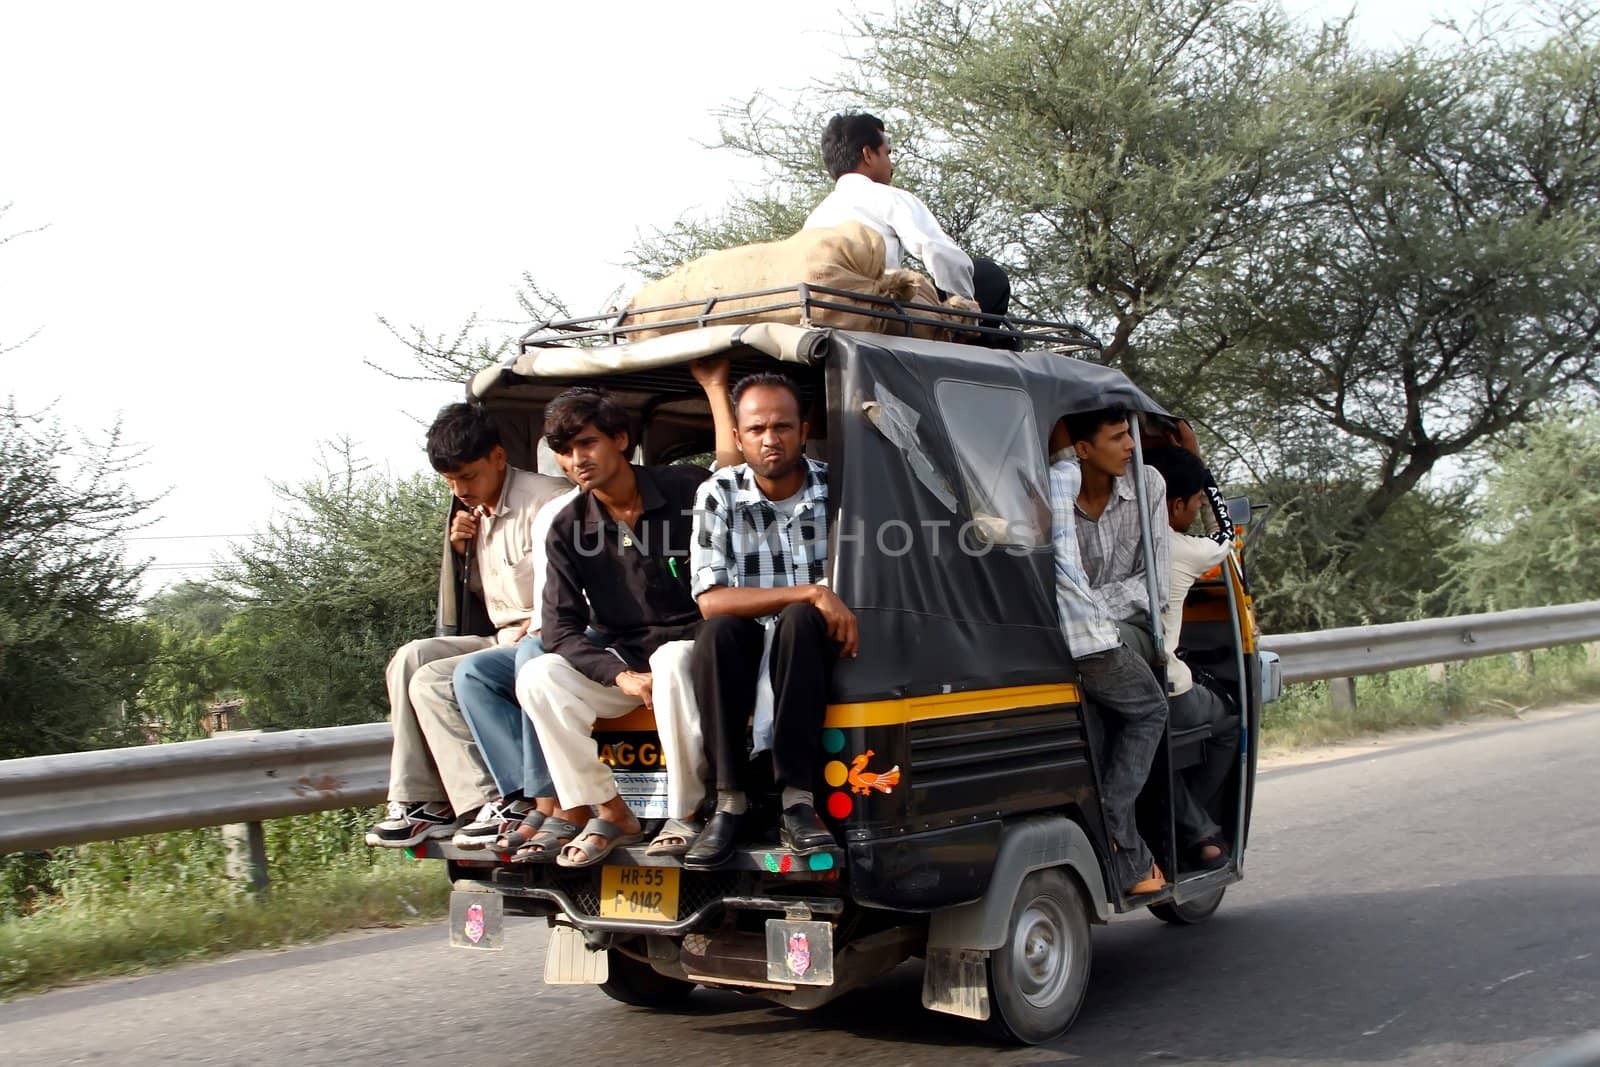 crazy road scene in India - small car with people